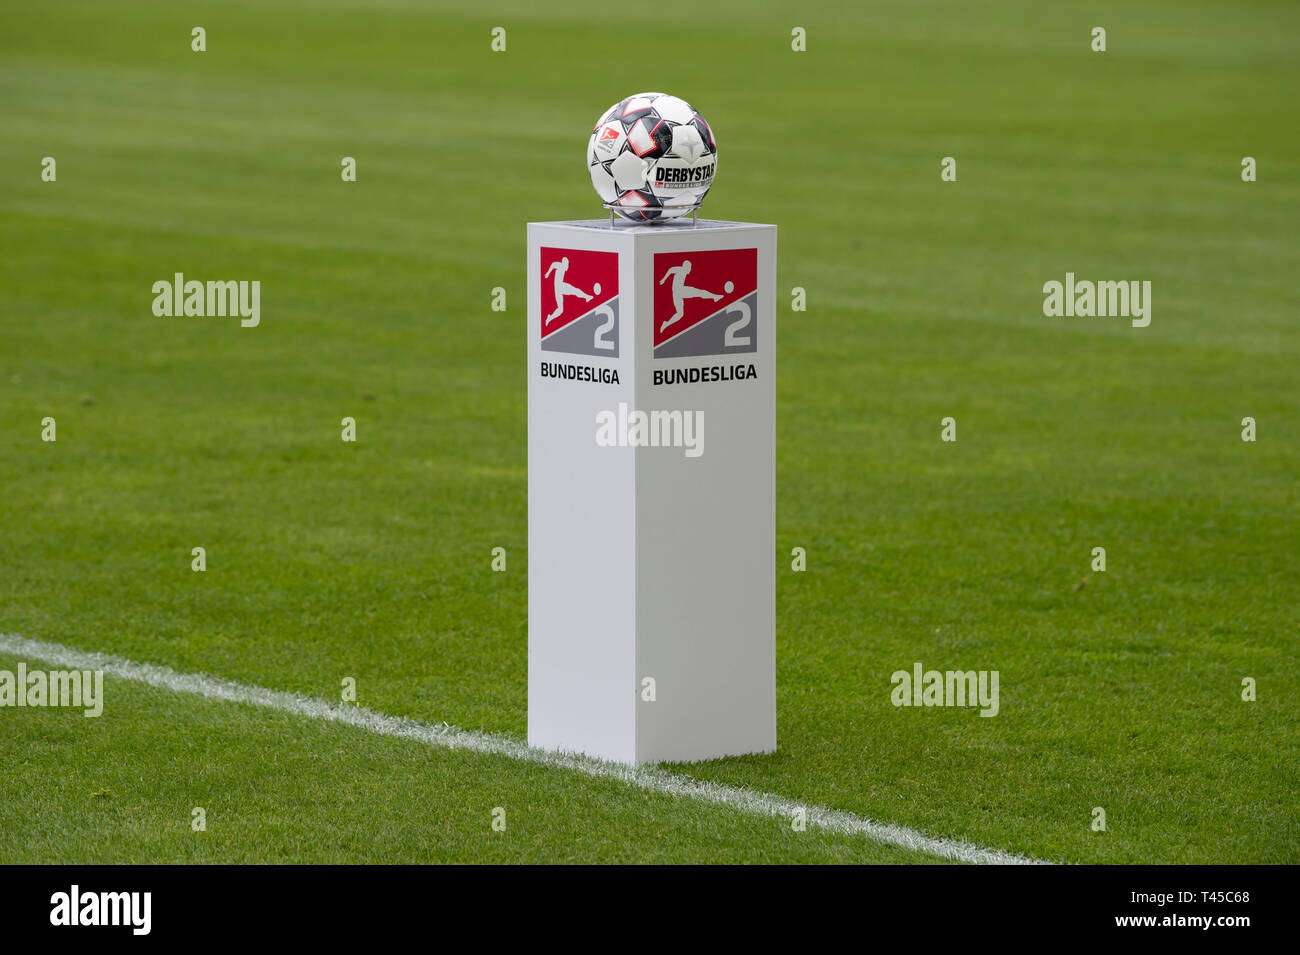 13 April 2019, Saxony-Anhalt, Magdeburg: Soccer: 2nd Bundesliga, 29th matchday, 1st FC Magdeburg - Darmstadt 98 in the MDCC-Arena. The ball lies on a stele with the inscription 'Bundesliga' on the playing field. Photo: Swen Pförtner/dpa - IMPORTANT NOTE: In accordance with the requirements of the DFL Deutsche Fußball Liga or the DFB Deutscher Fußball-Bund, it is prohibited to use or have used photographs taken in the stadium and/or the match in the form of sequence images and/or video-like photo sequences. Stock Photo